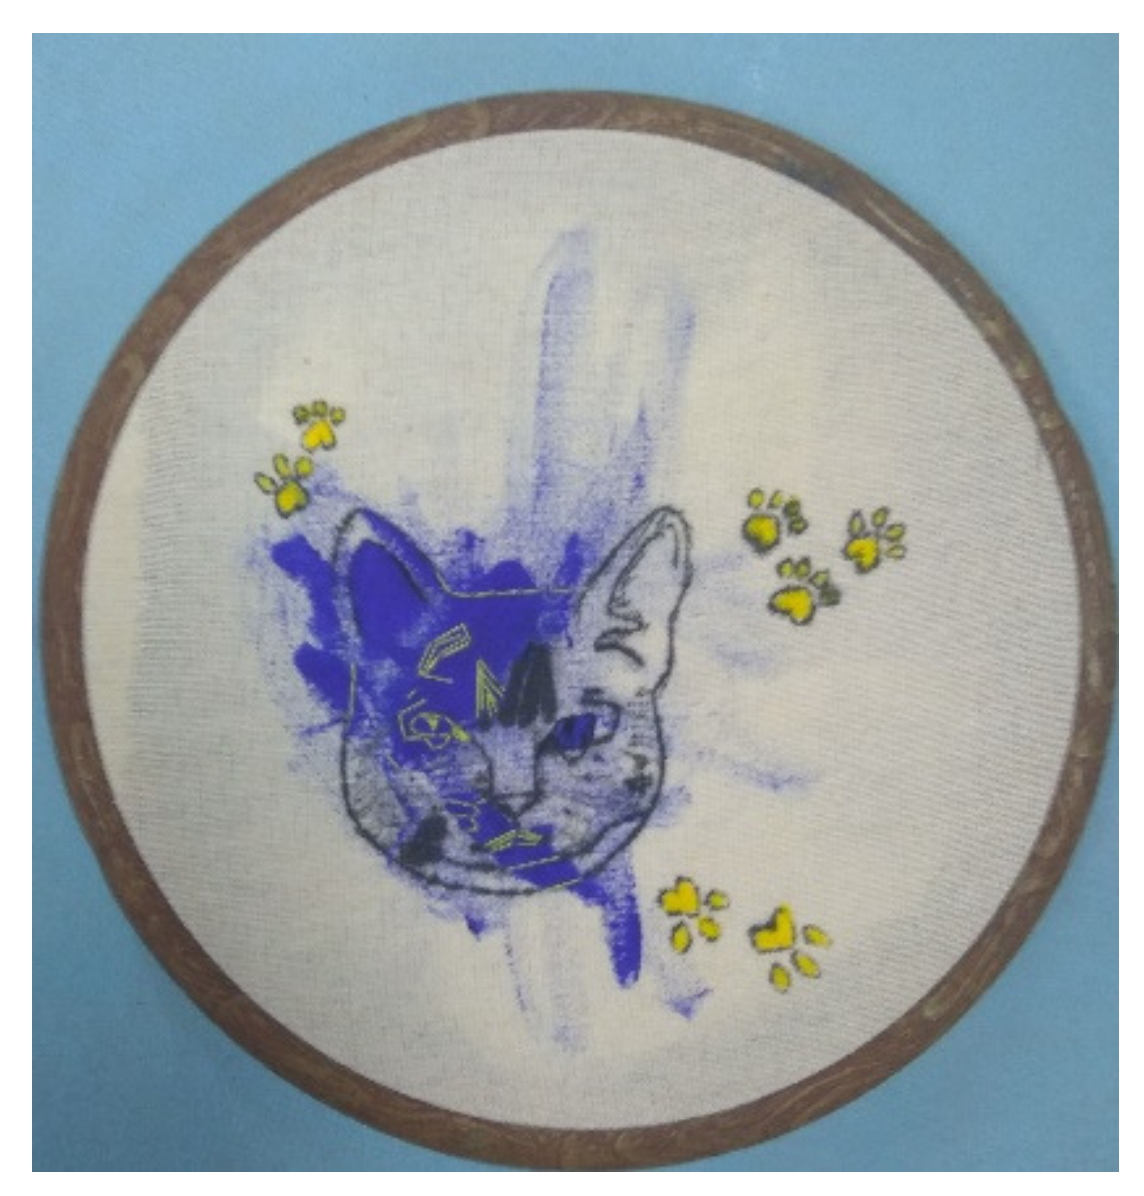 An introduction to using paint in your embroidery projects 